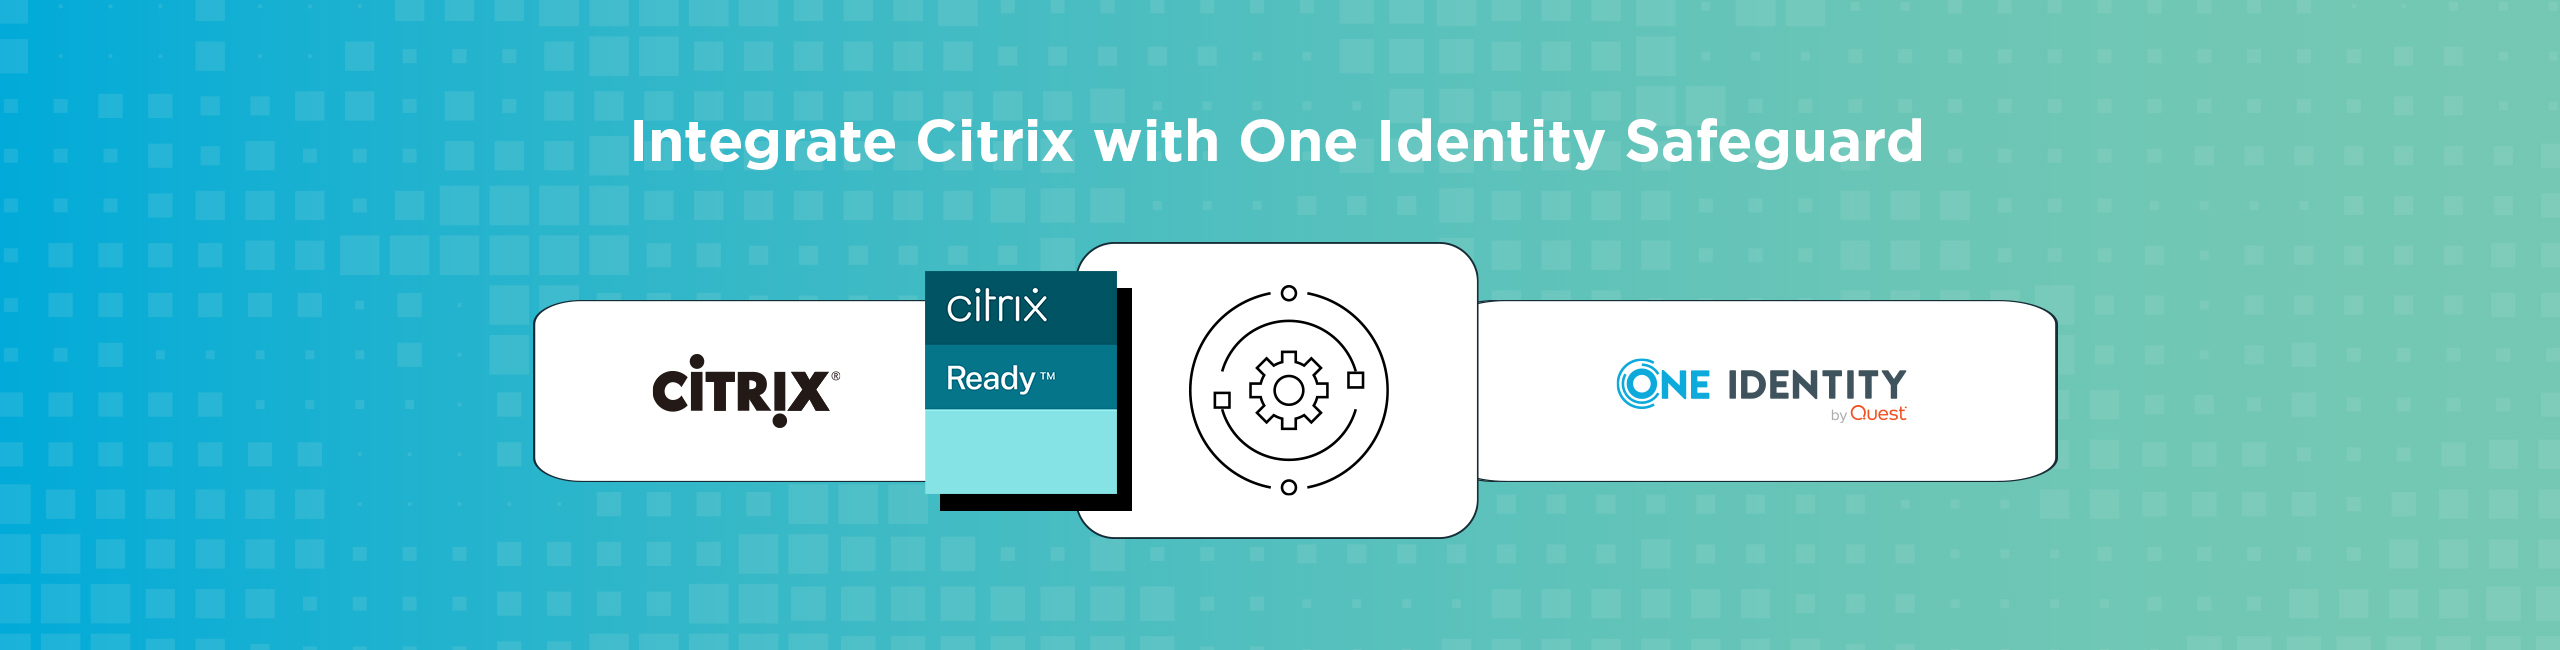 Integrate Citrix with One Identity Safeguard